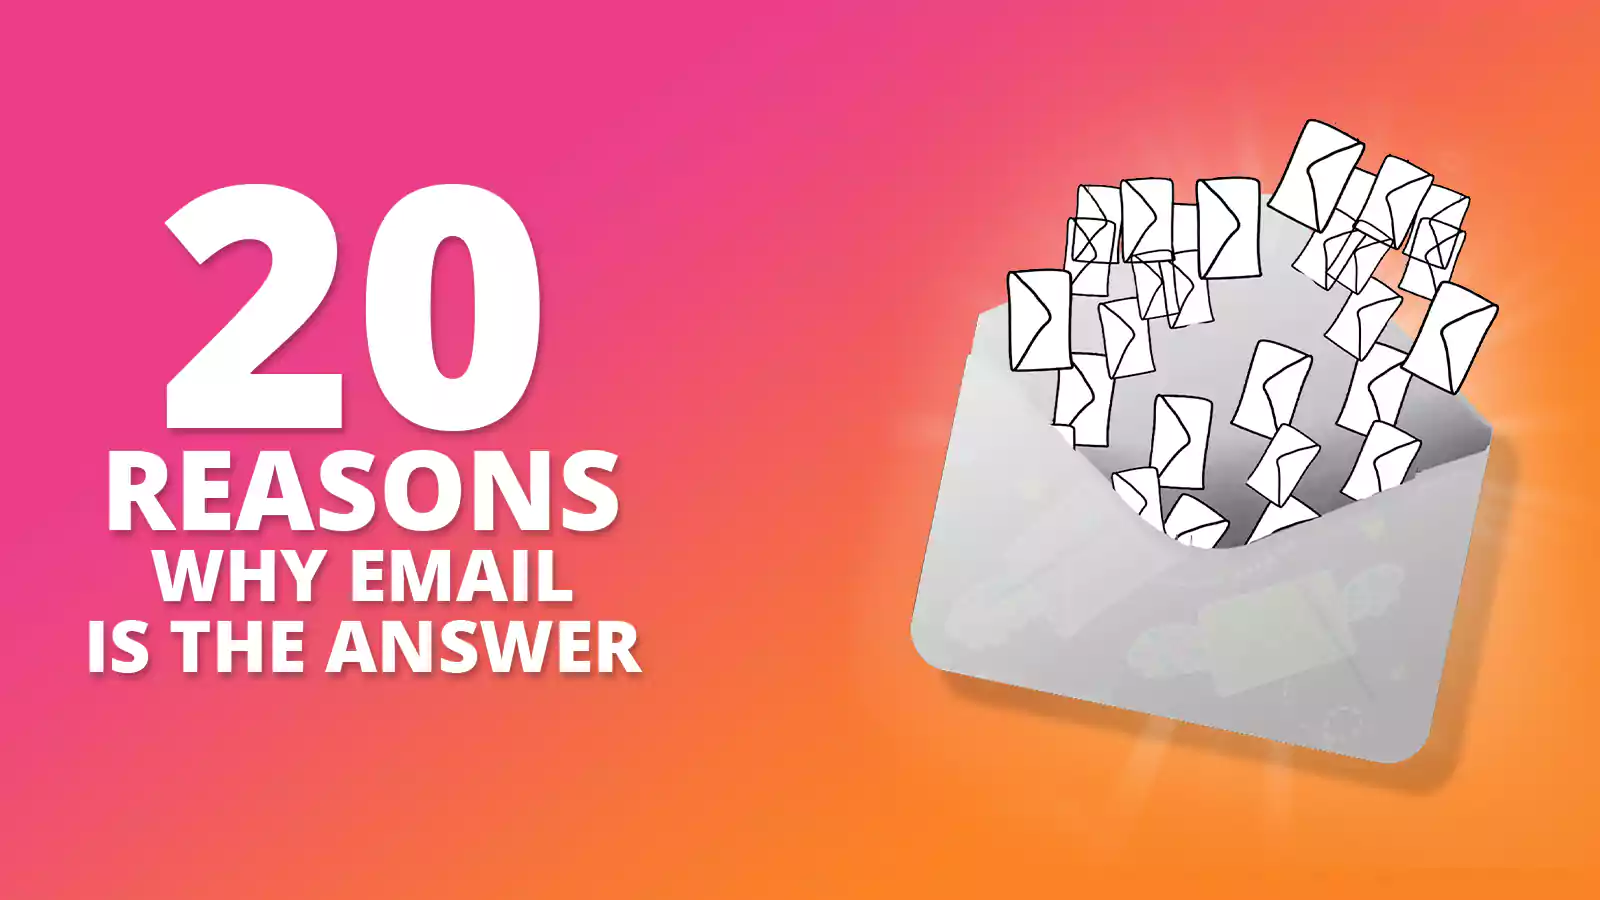 Top 20 reasons why email is the answer